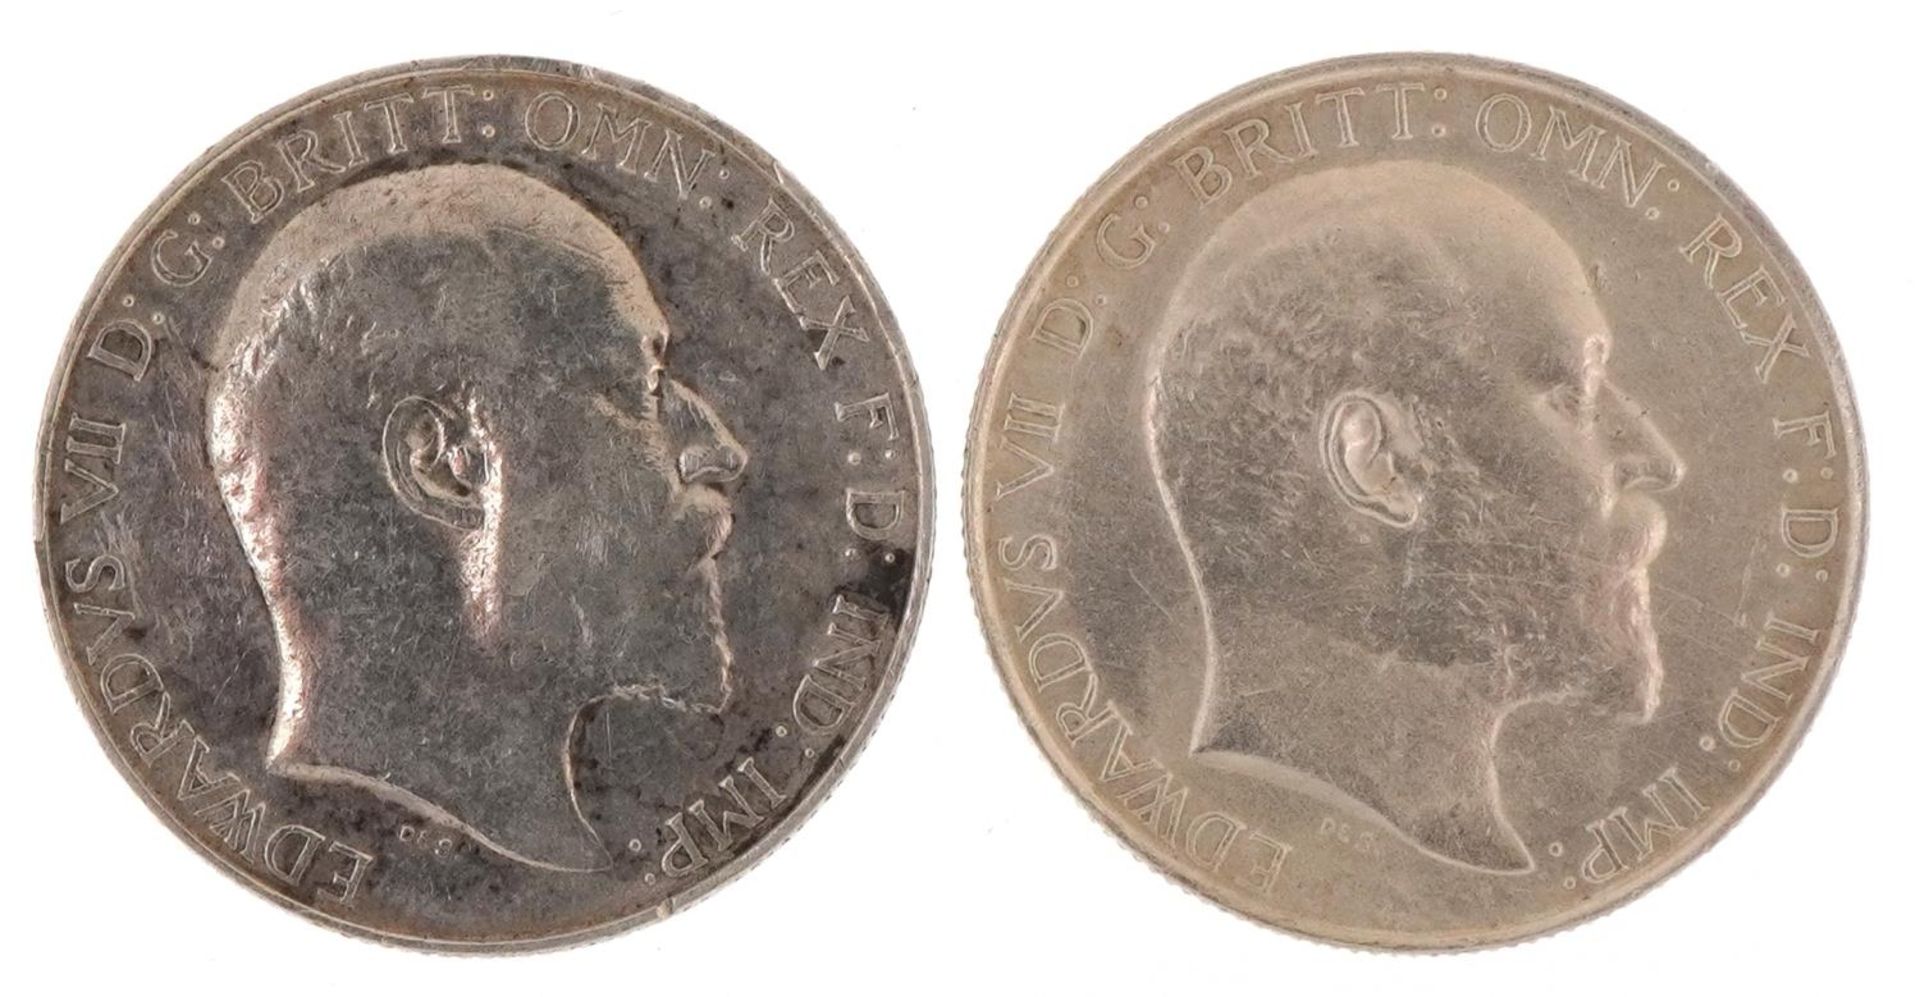 Two Edward VII florins dates 1905 and 1910